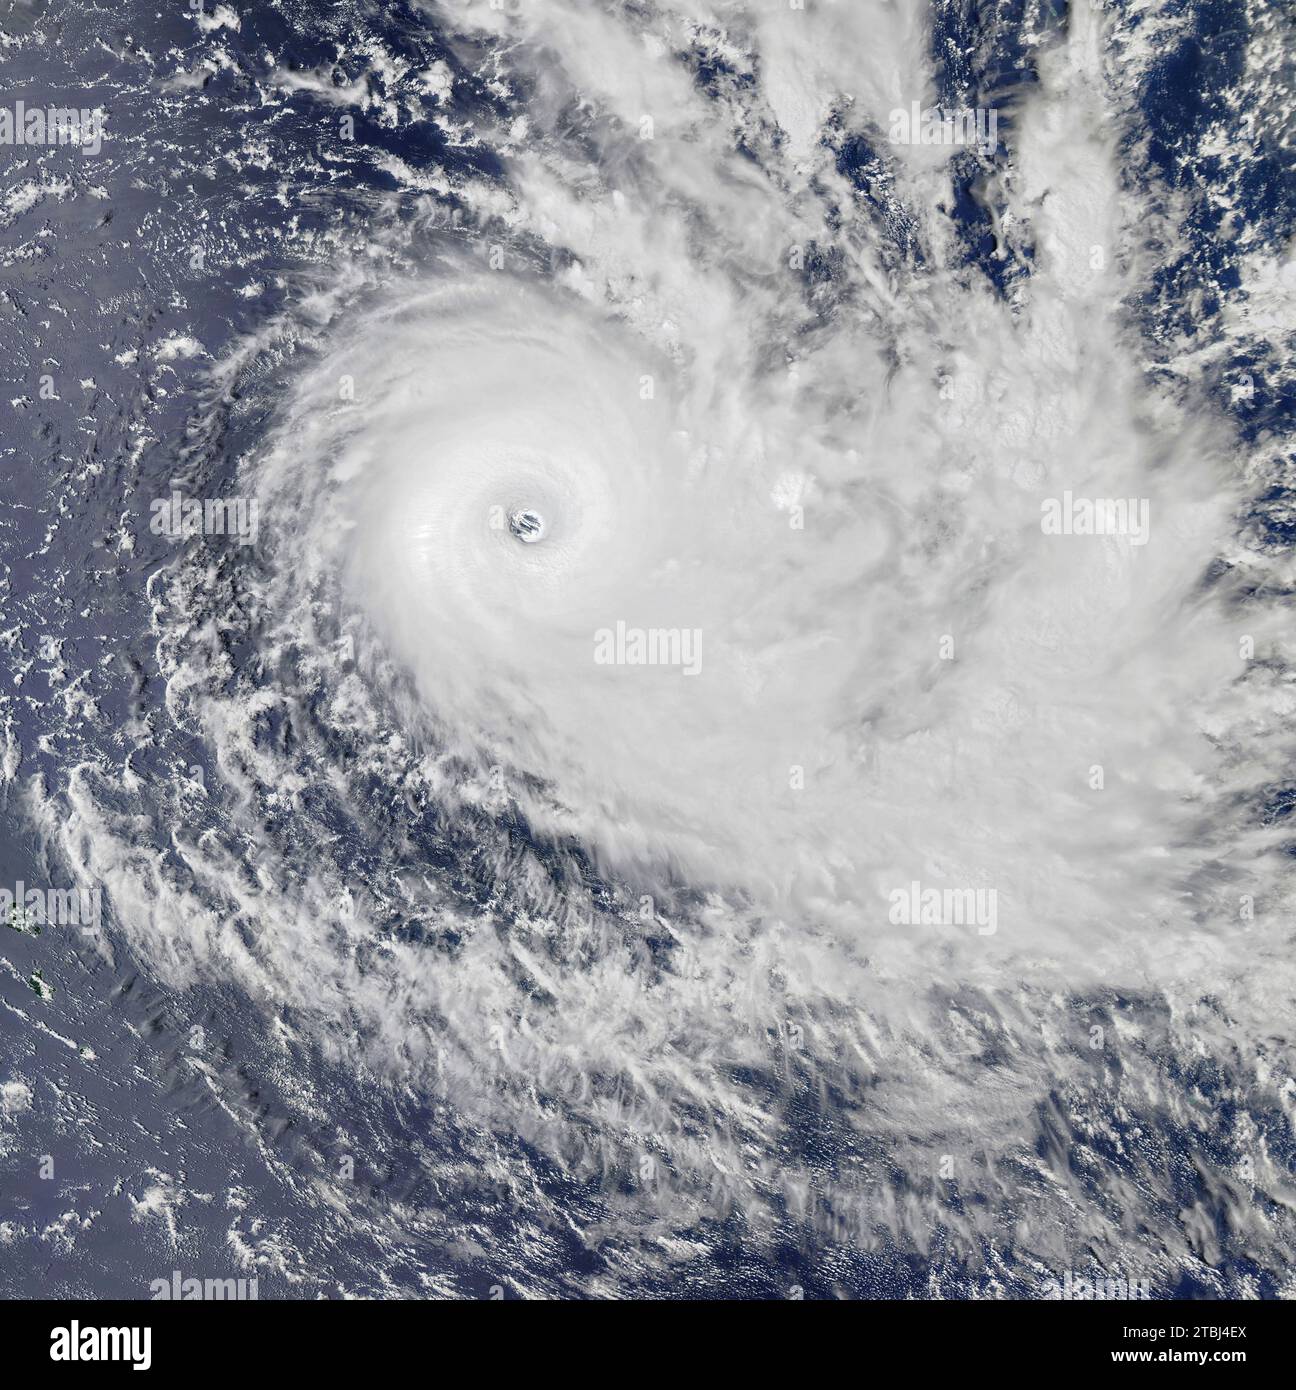 December 16, 2020 - Tropical cyclone Yasa over the South Pacific island nation of Fiji. Stock Photo